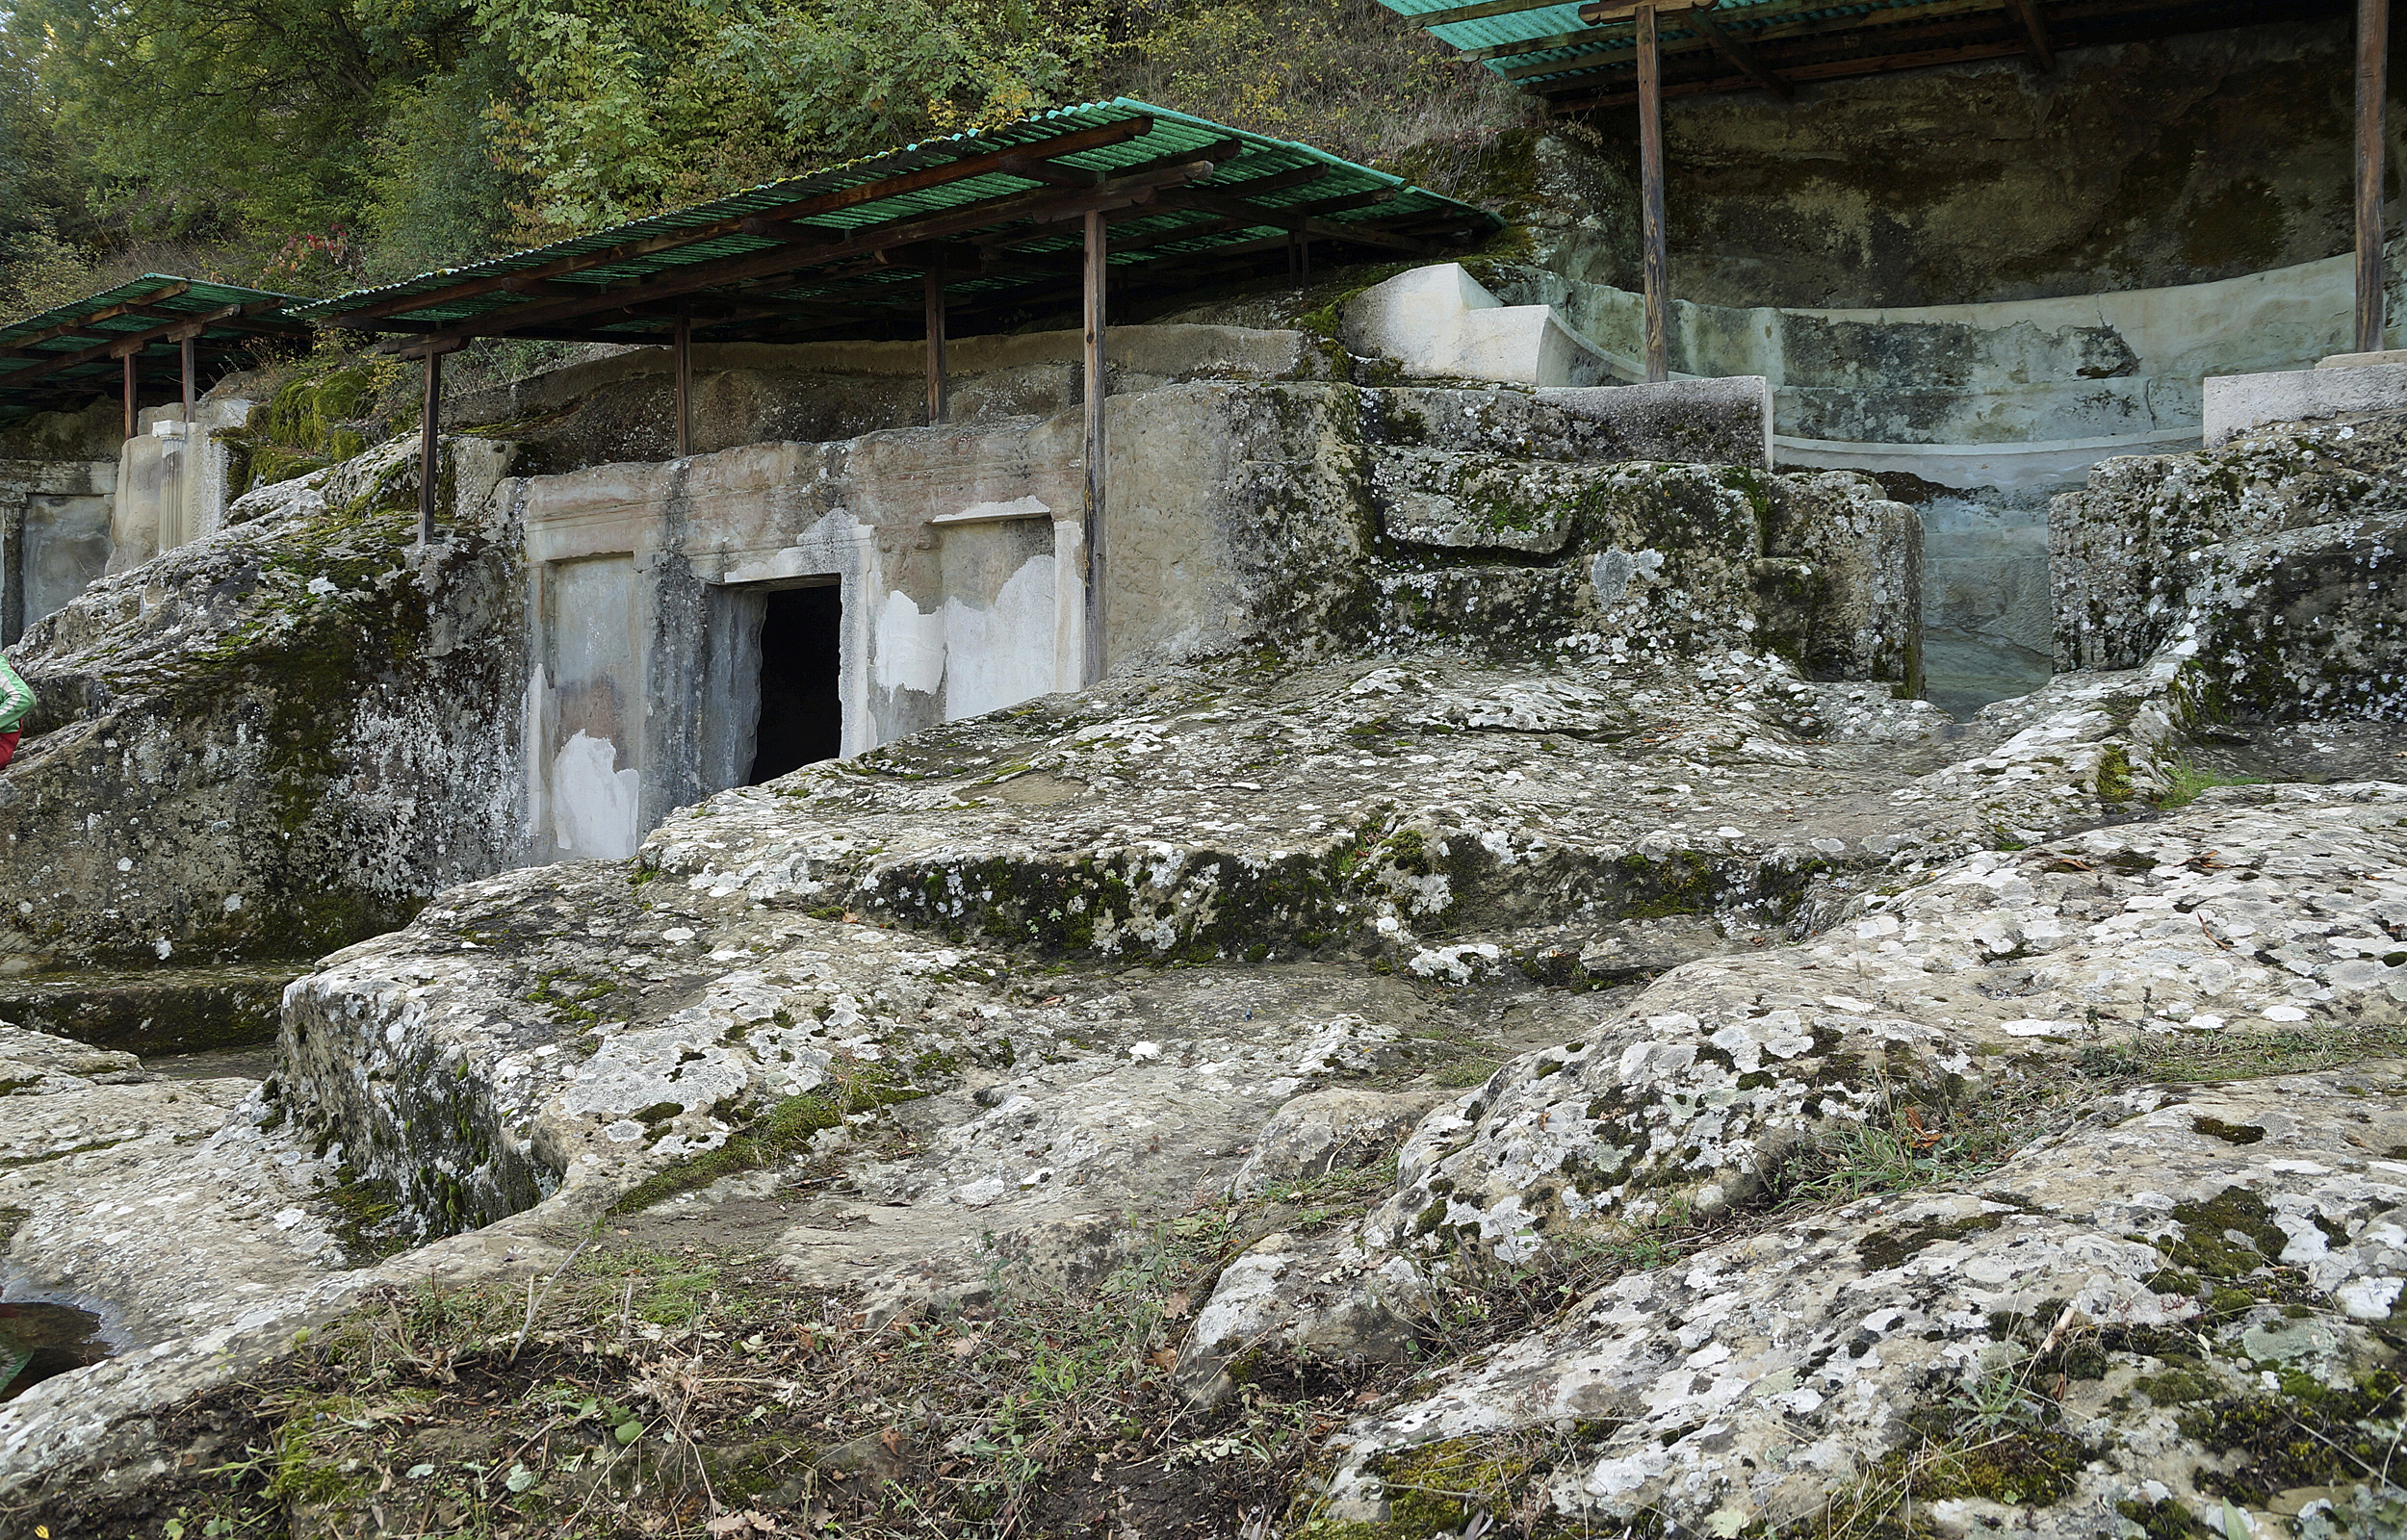 The Monumental Tombs of Selce